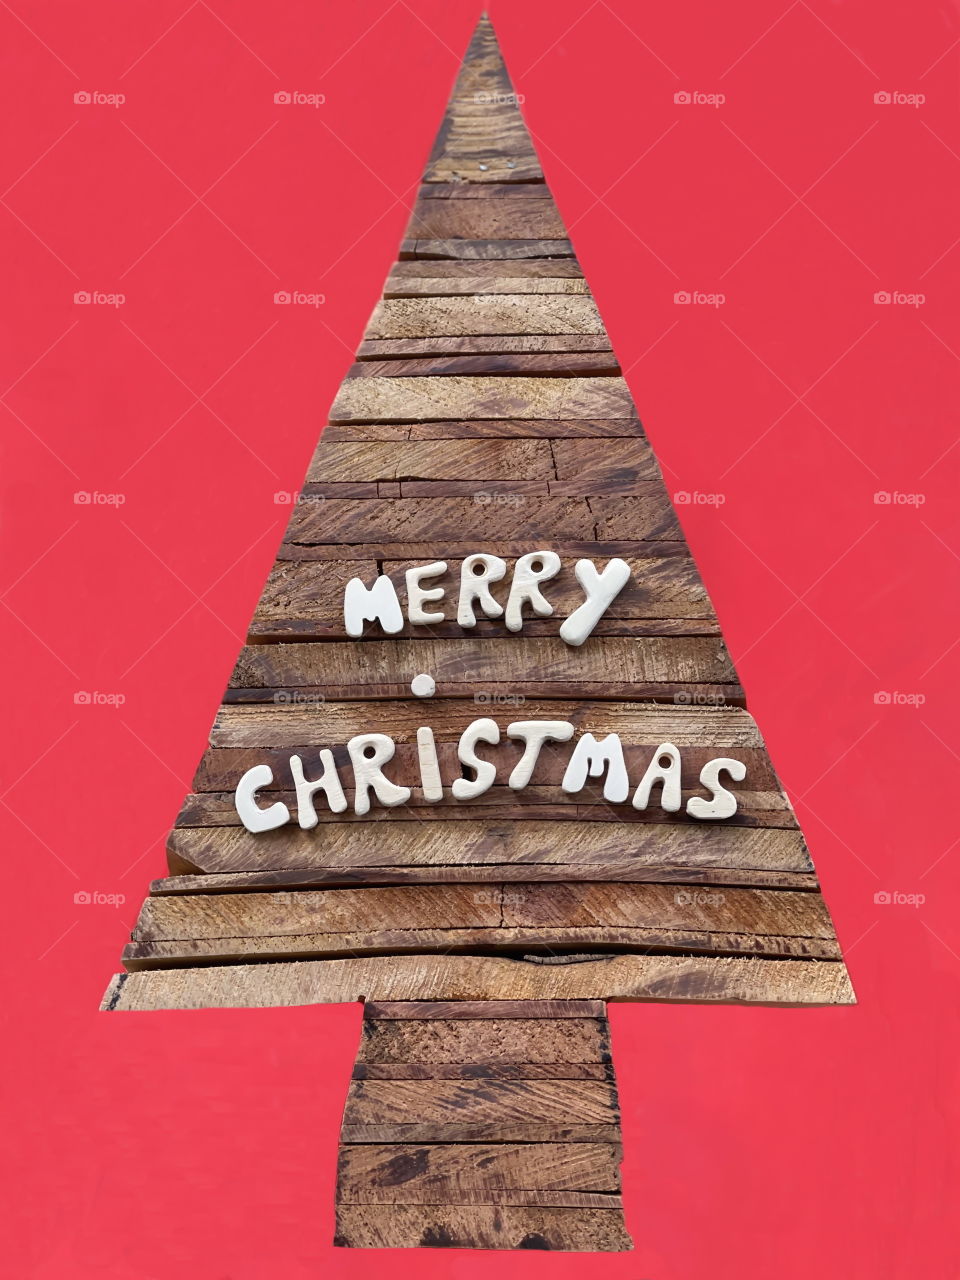 Merry Christmas message with a composition of wooden letters over a stylized wooden Christmas tree